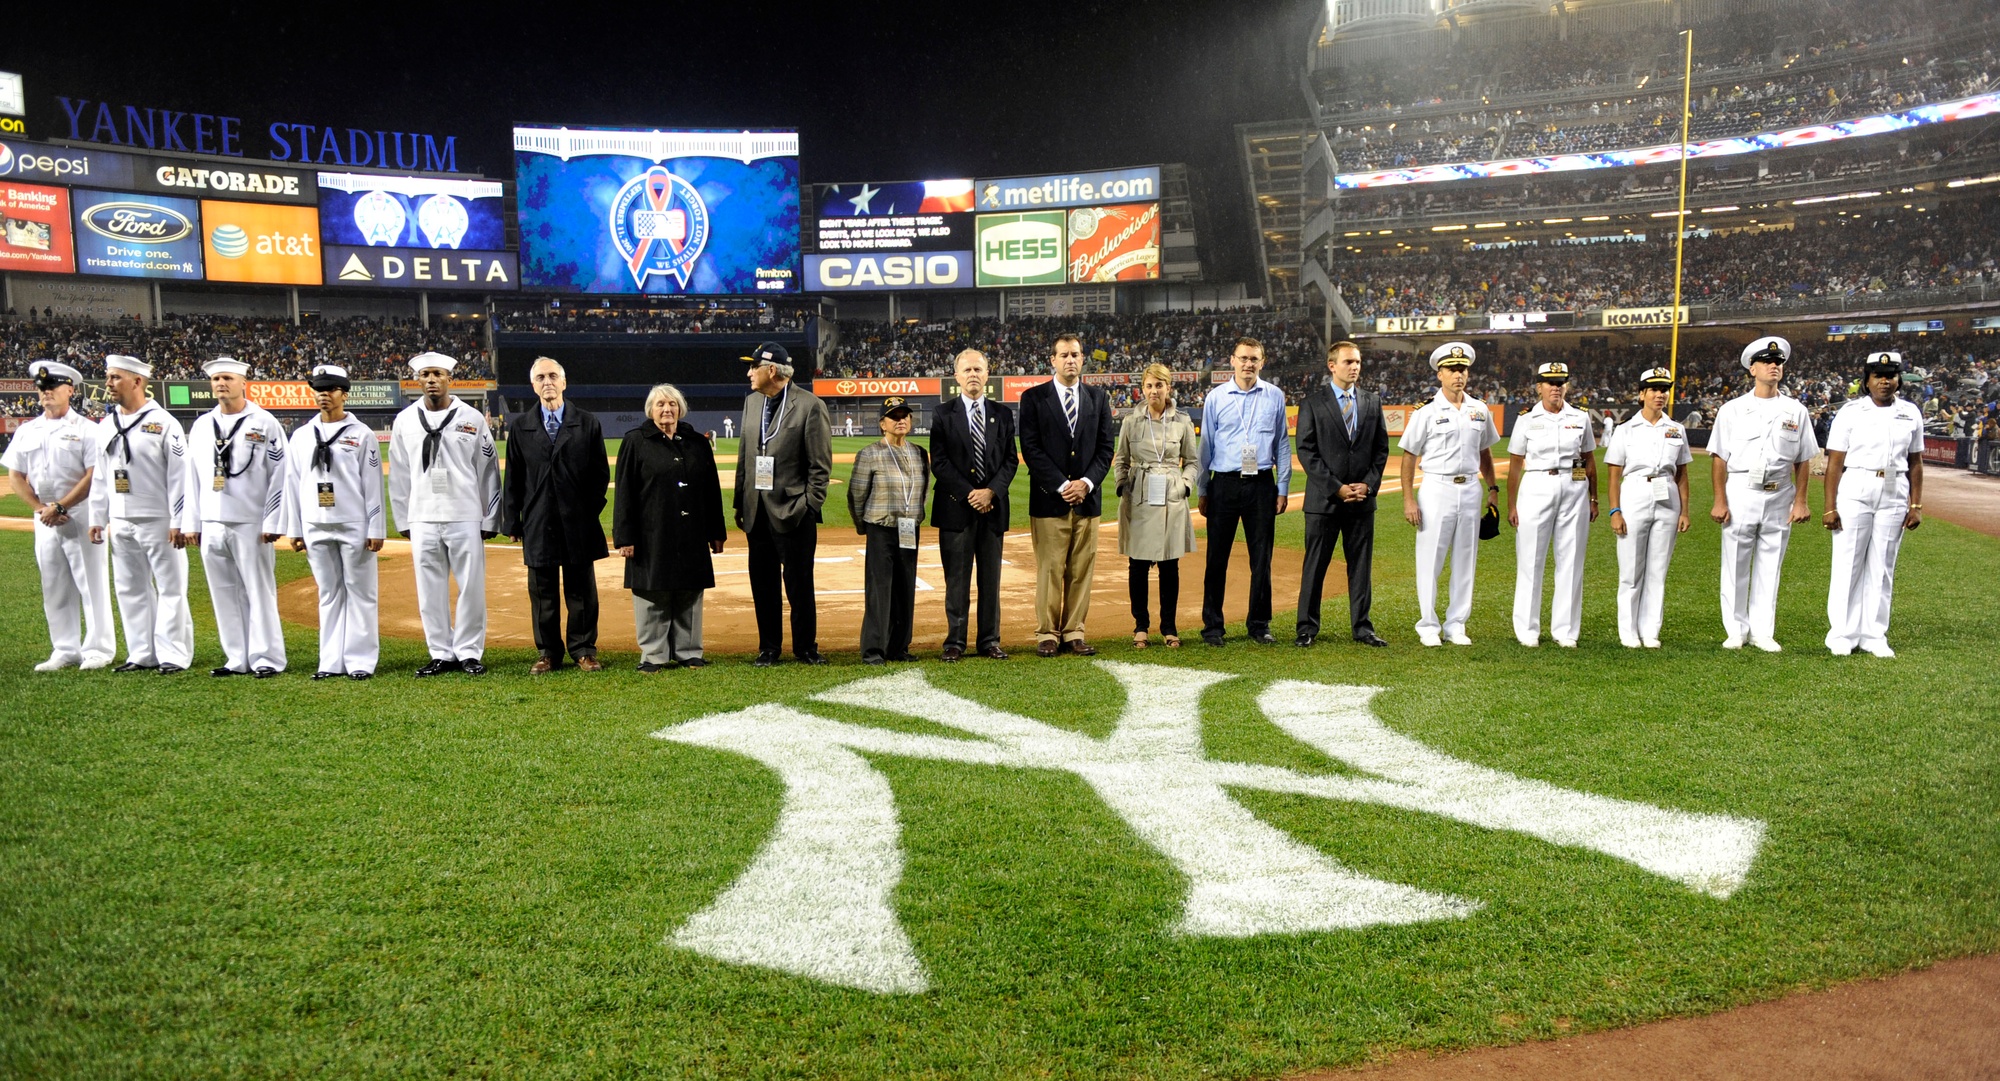 DVIDS - Images - pre-game ceremony at Yankee Stadium [Image 2 of 3]